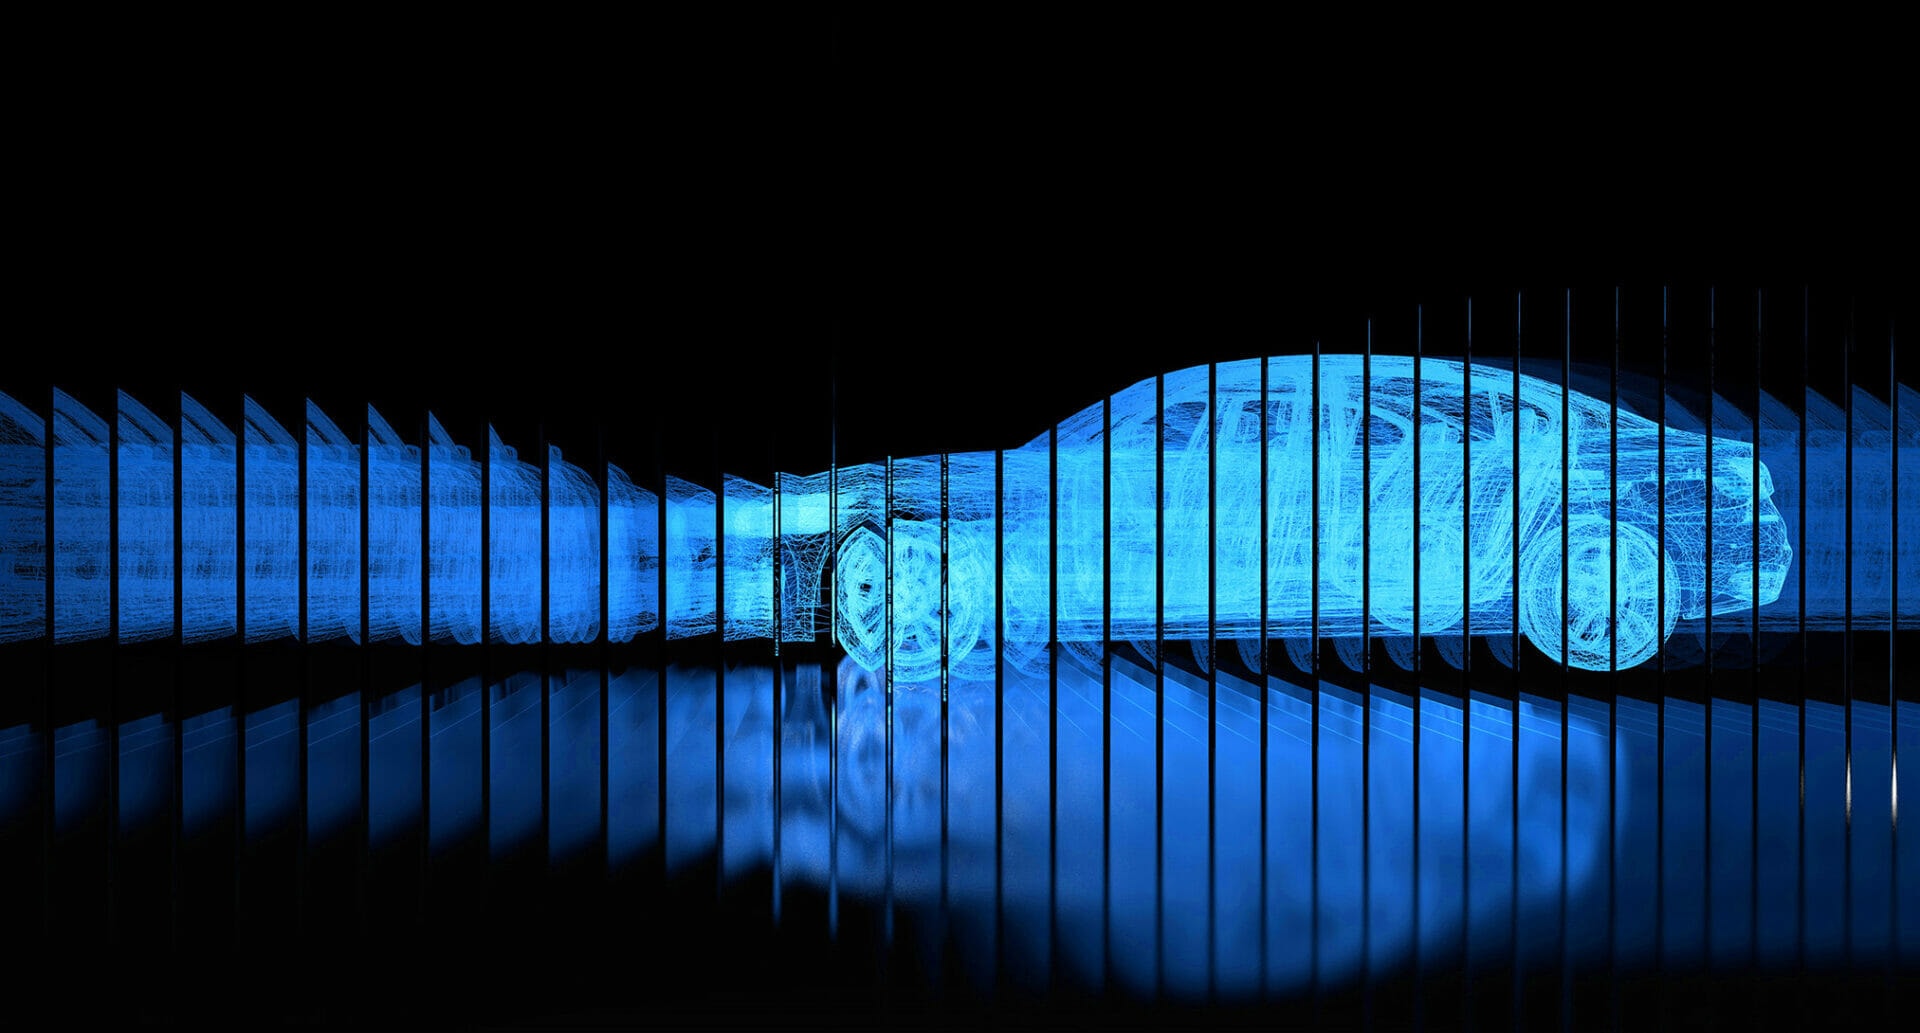 An image of a blue car on a black background.